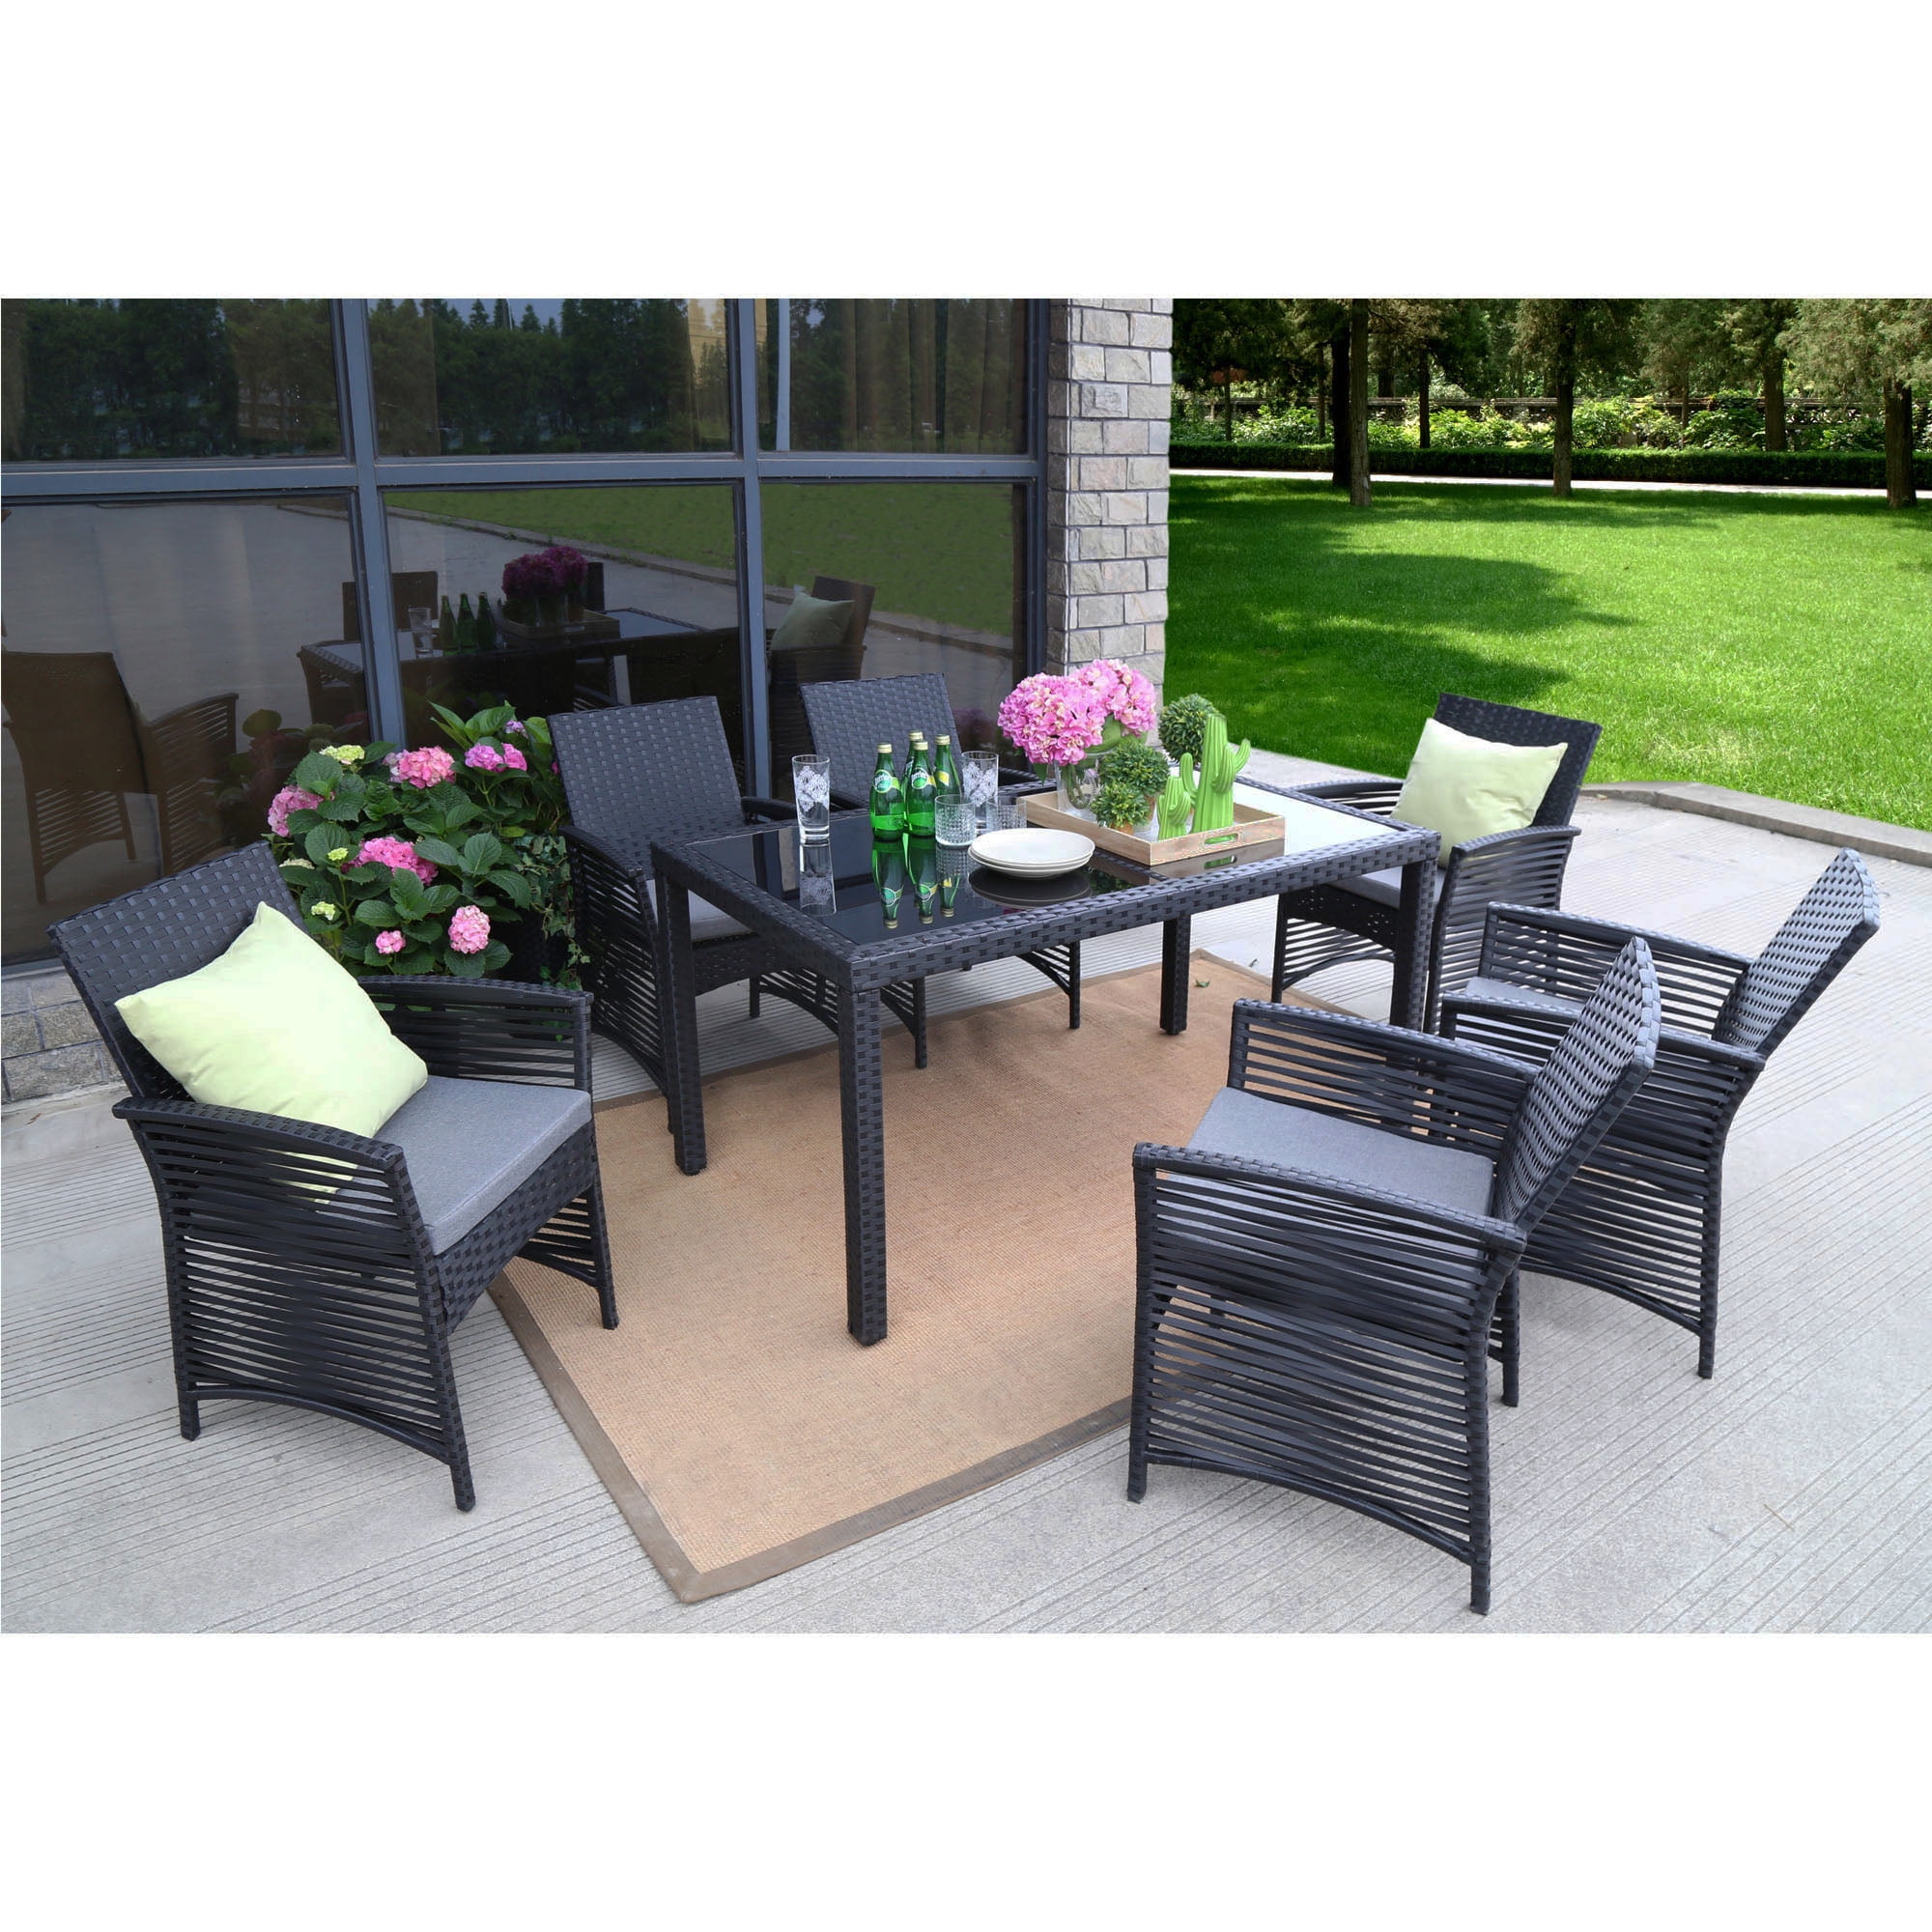 Baner Garden H19bl 7 Pieces Outdoor Patio Backyard Steel Frame Sofa Set Rattan Furniture Six Chairs With Cushions And One Rectangle Table Black Com - Cover For Patio Table And Six Chairs